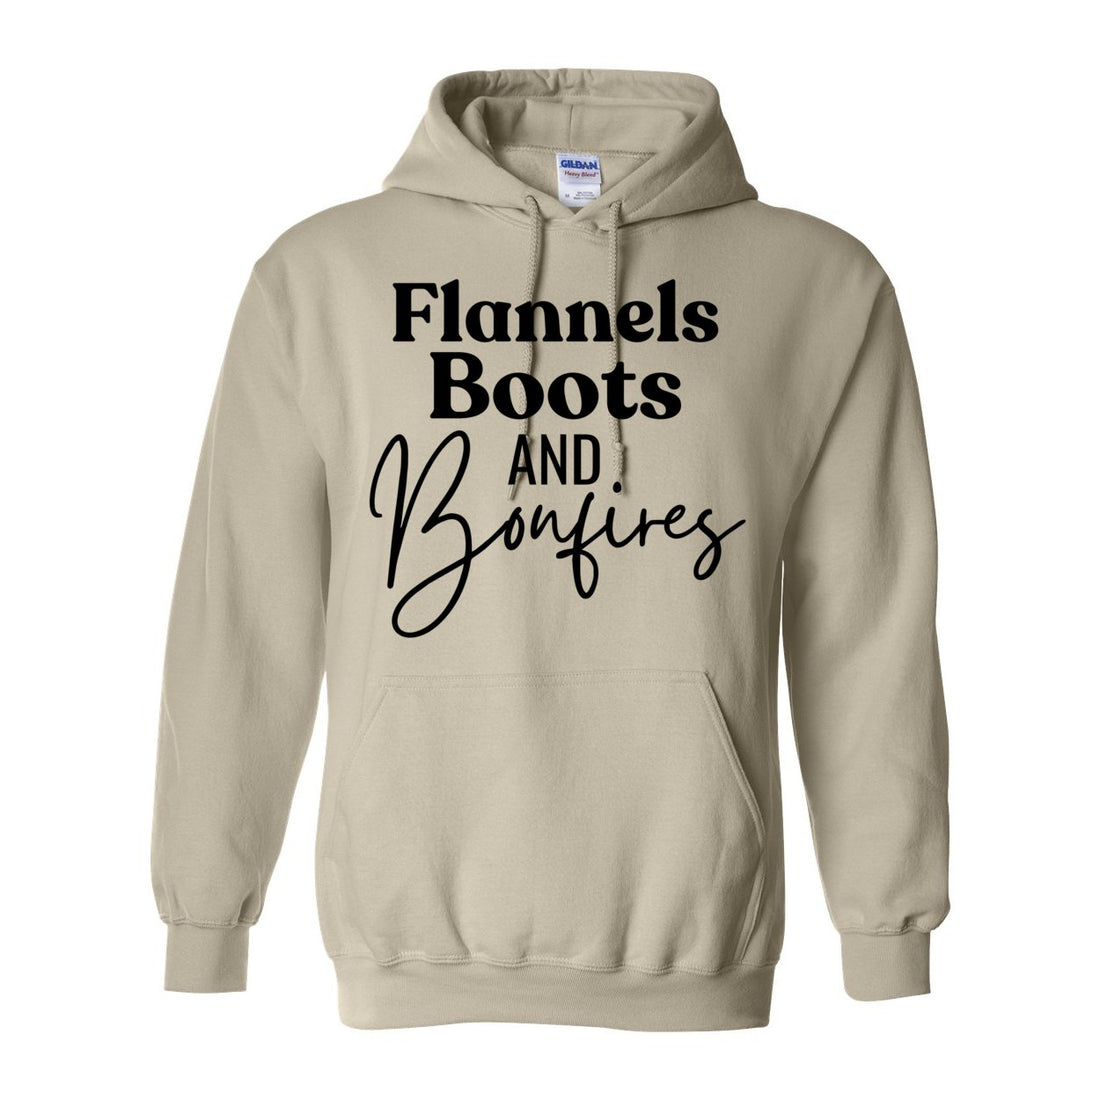 Flannels Boots & Bonfires Hooded Sweatshirt - Sweaters/Hoodies - Positively Sassy - Flannels Boots & Bonfires Hooded Sweatshirt